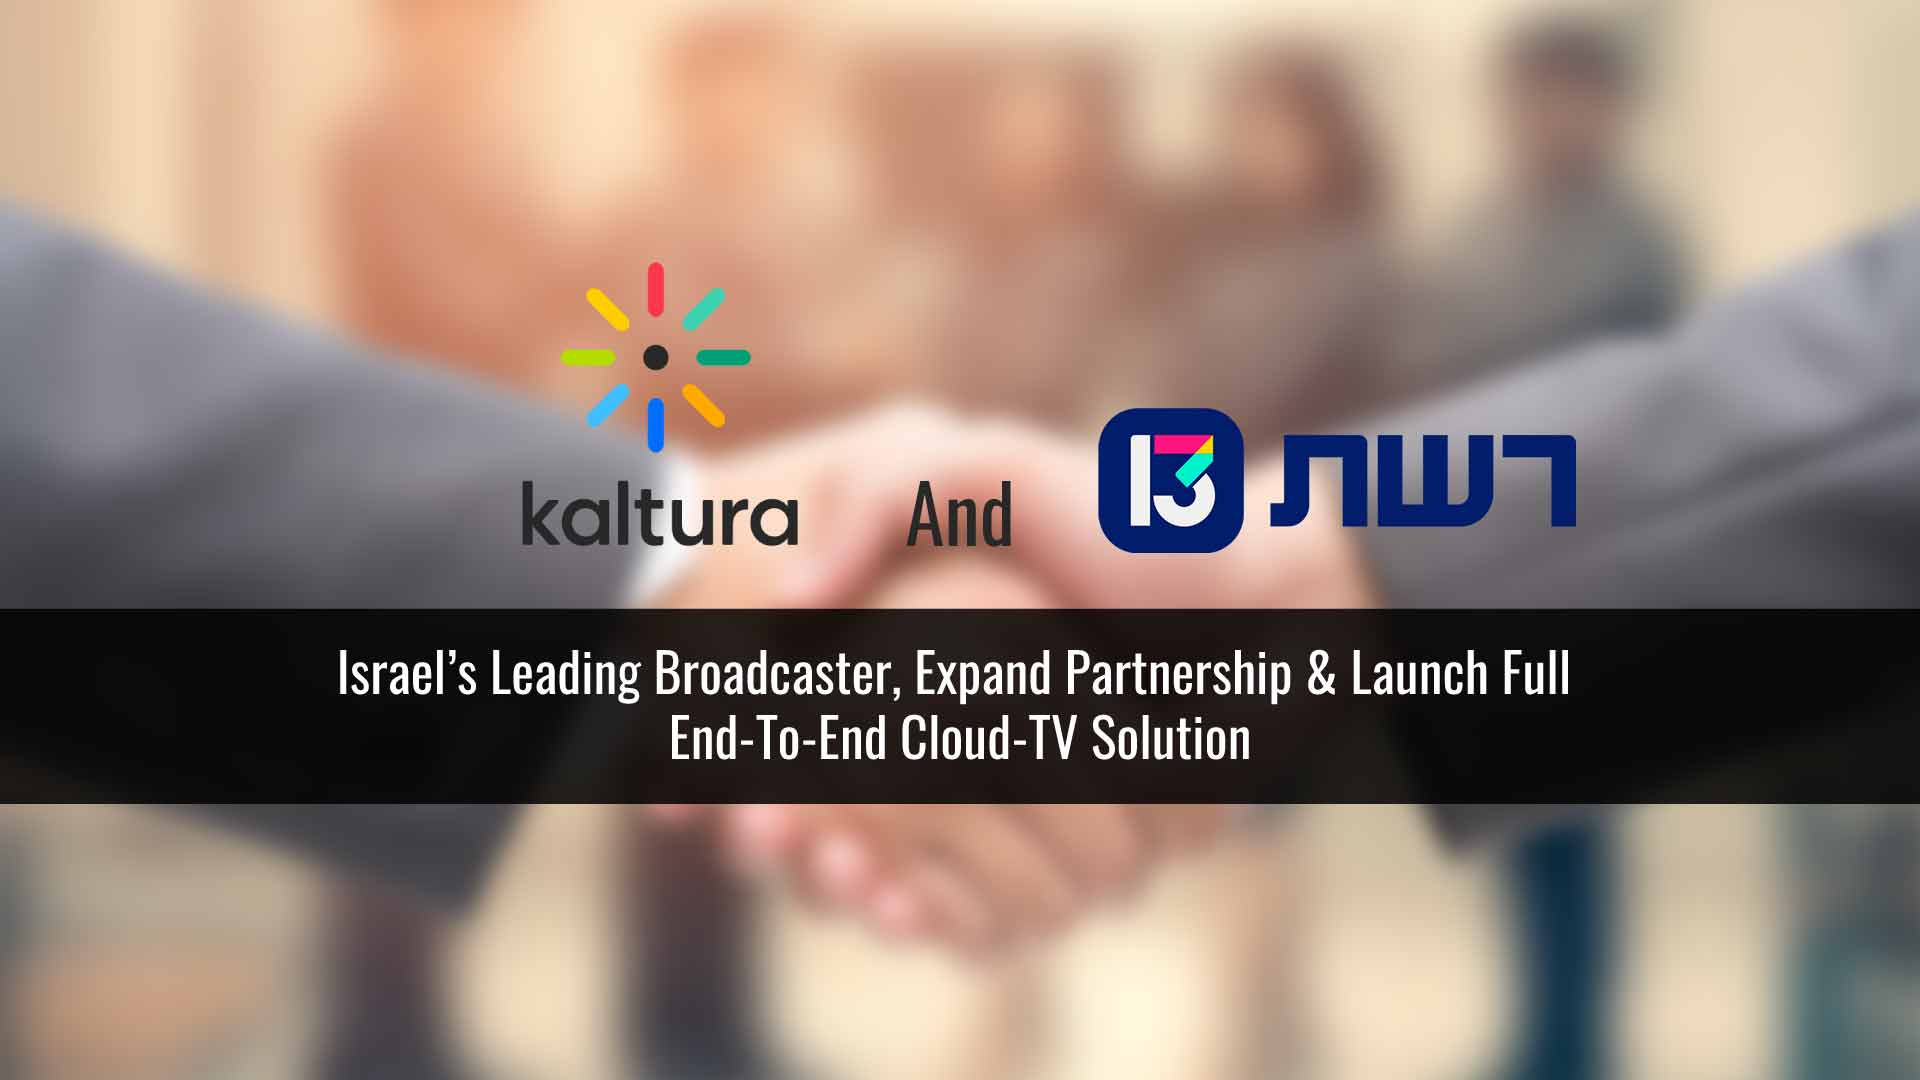 Kaltura and Reshet 13, Israel’s Leading Broadcaster, Expand Partnership & Launch Full End-to-End Cloud-TV Solution